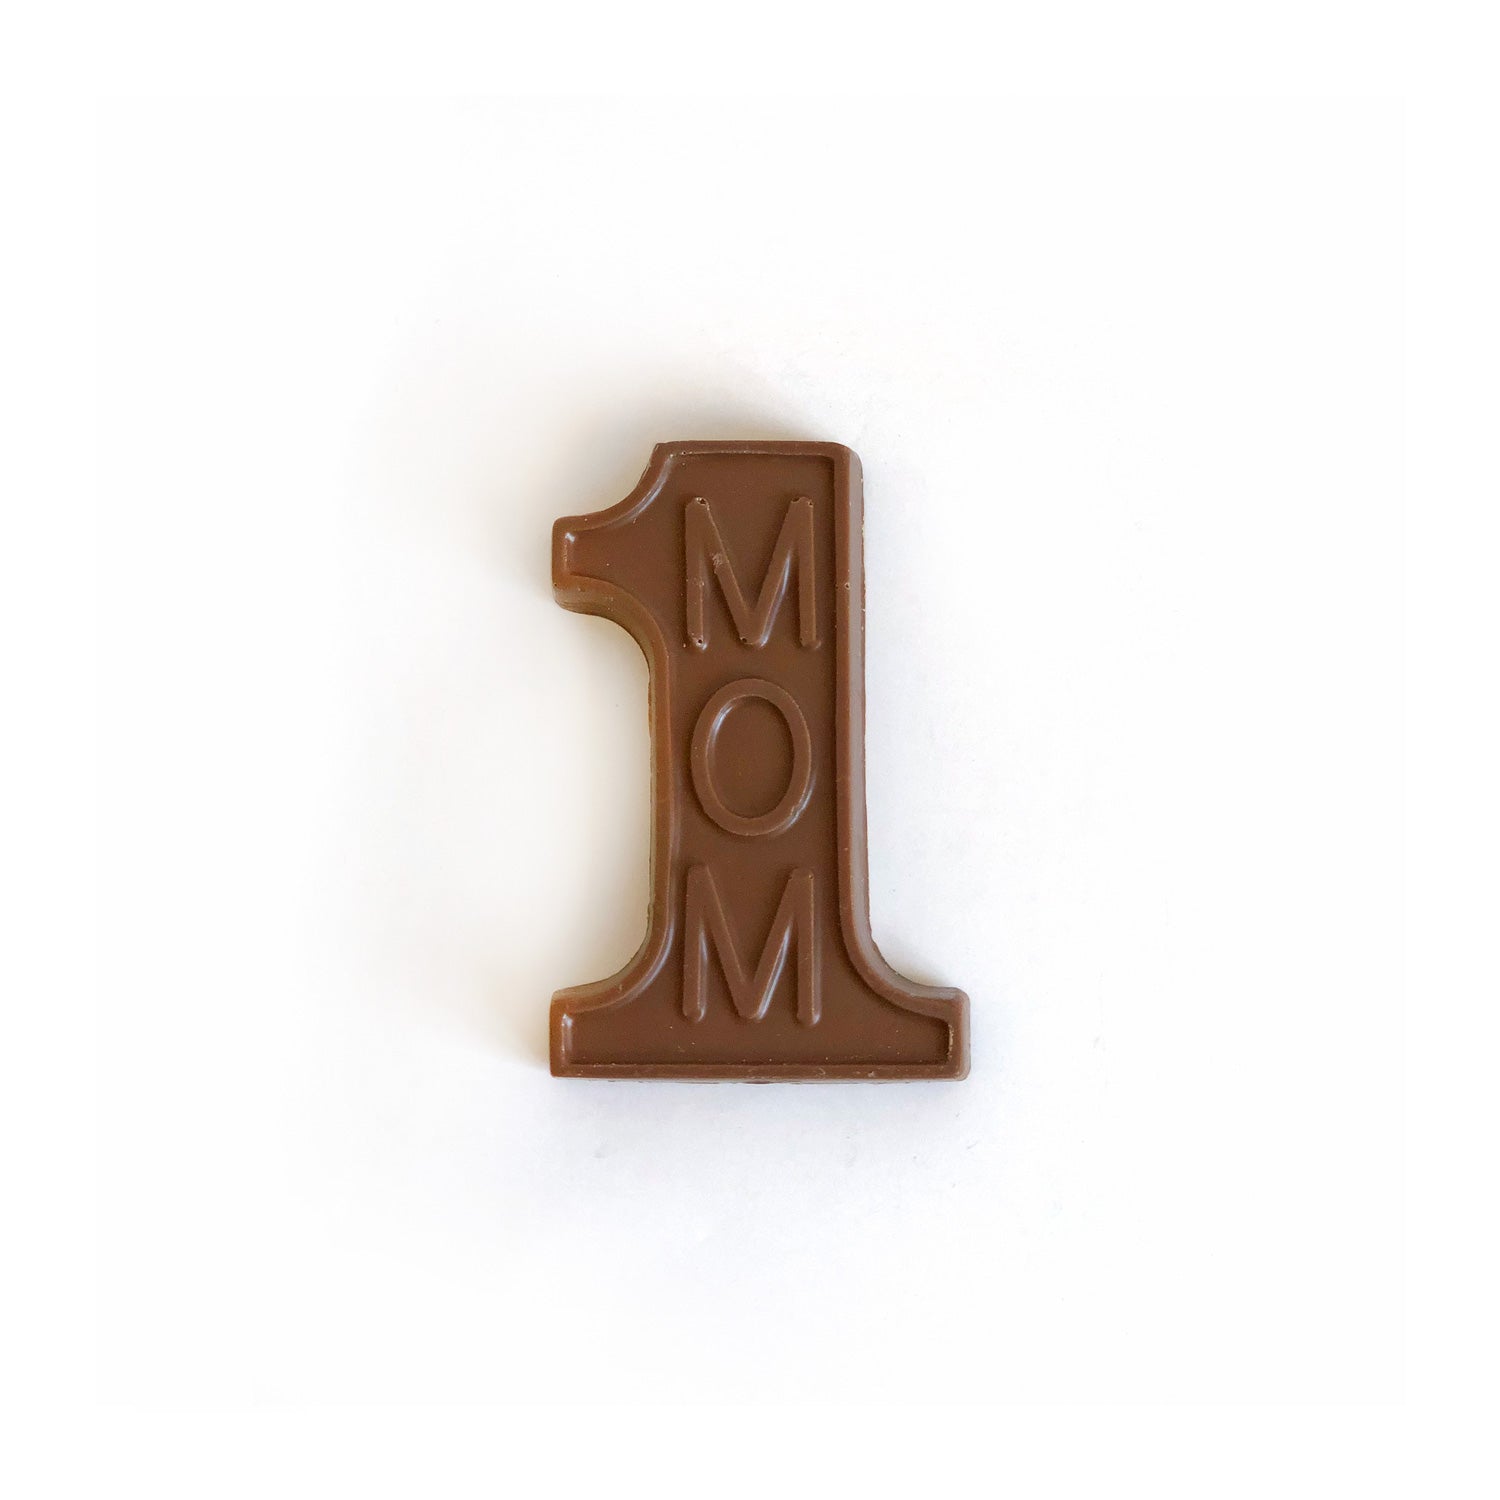 A big chocolate 1 with mom lettered within.